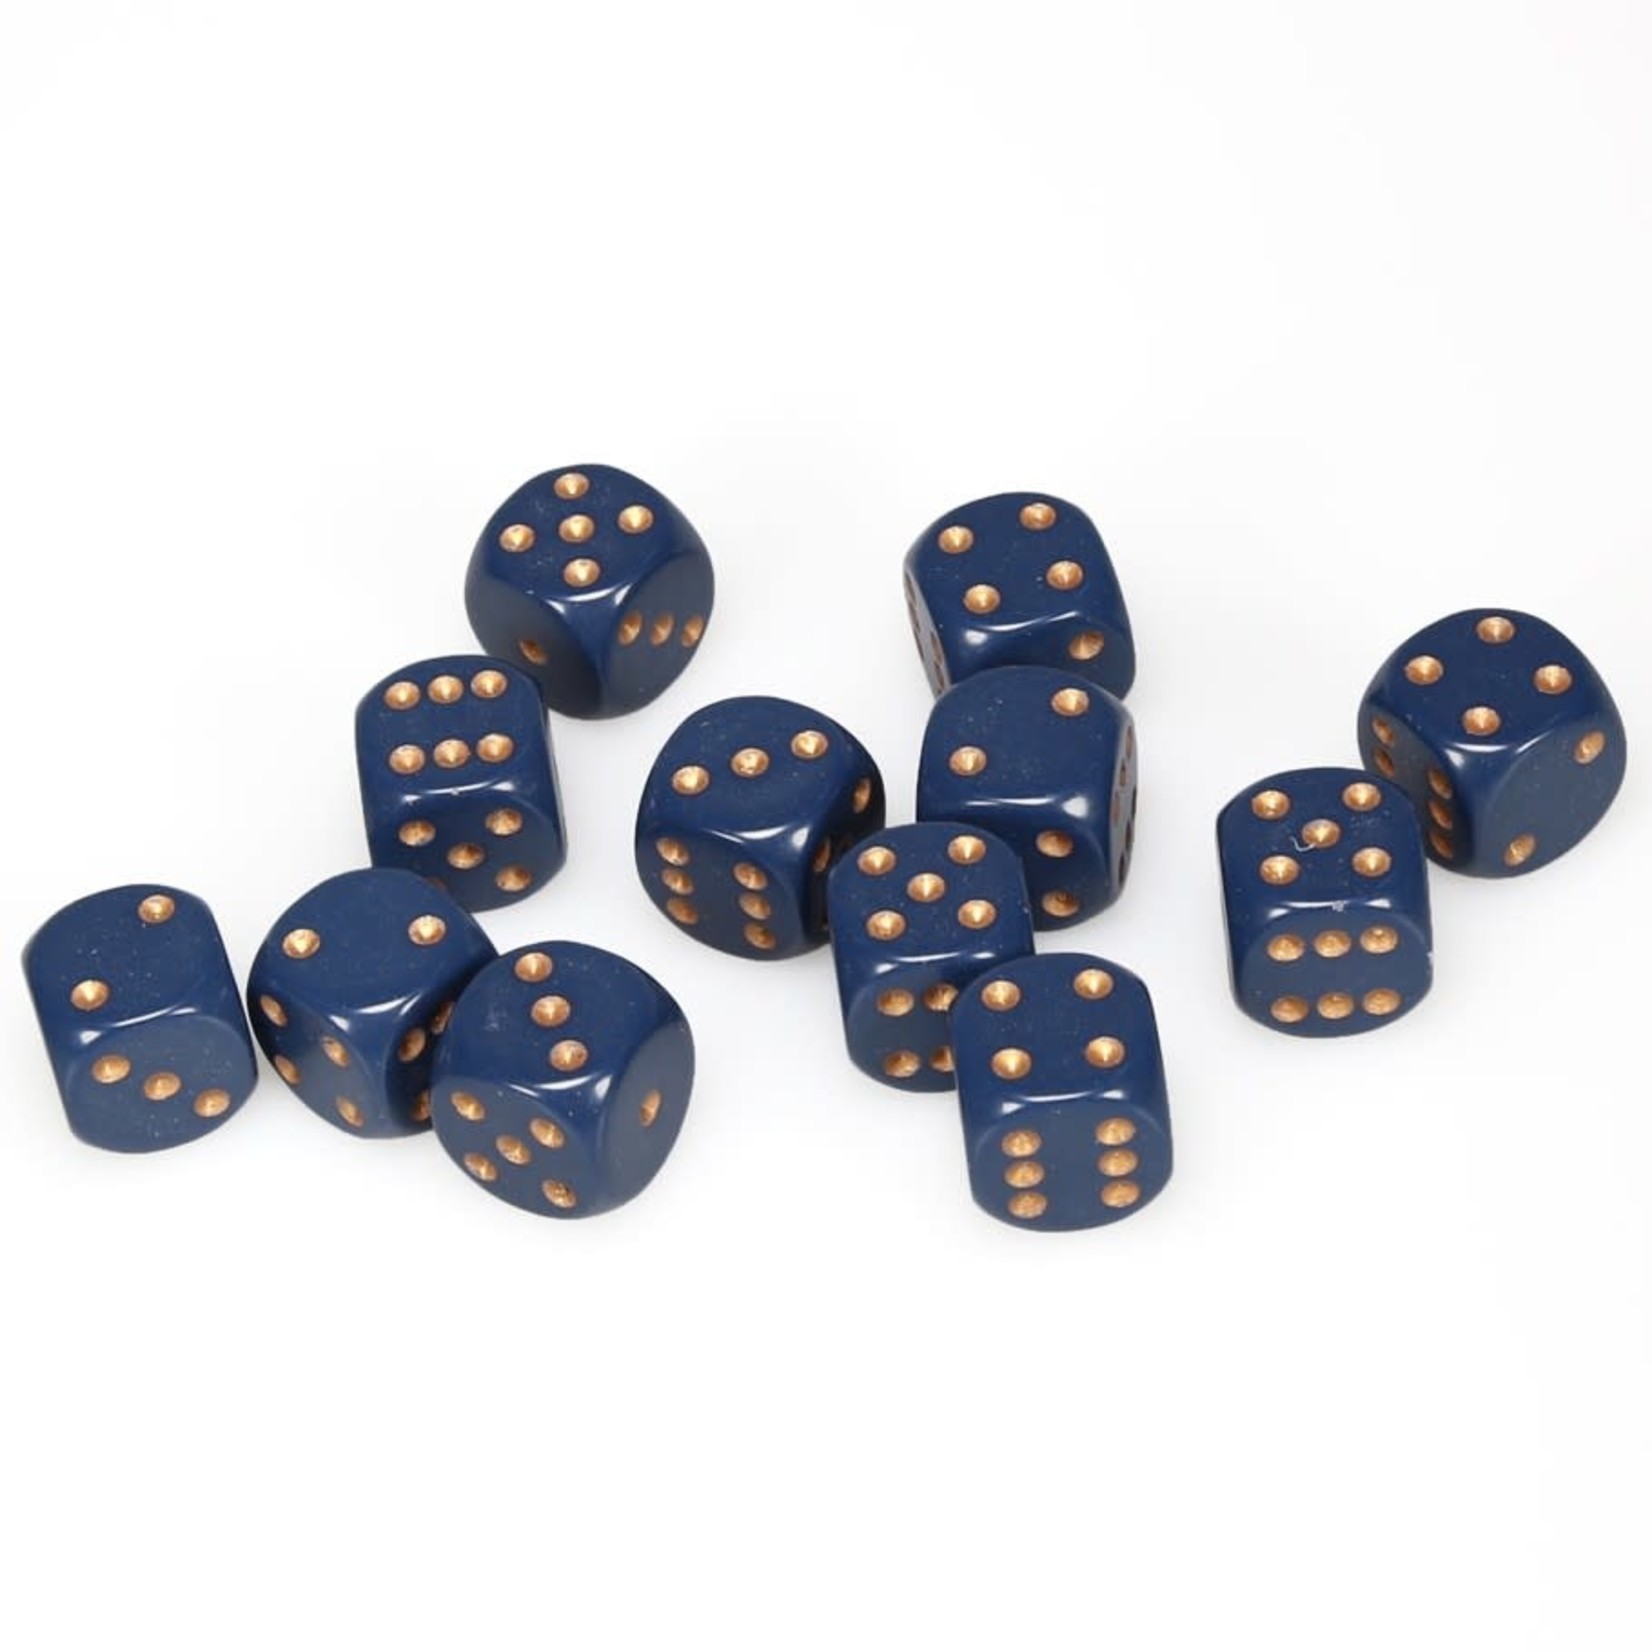 Chessex Chessex Opaque Dusty Blue with Copper 16 mm d6 12 die set